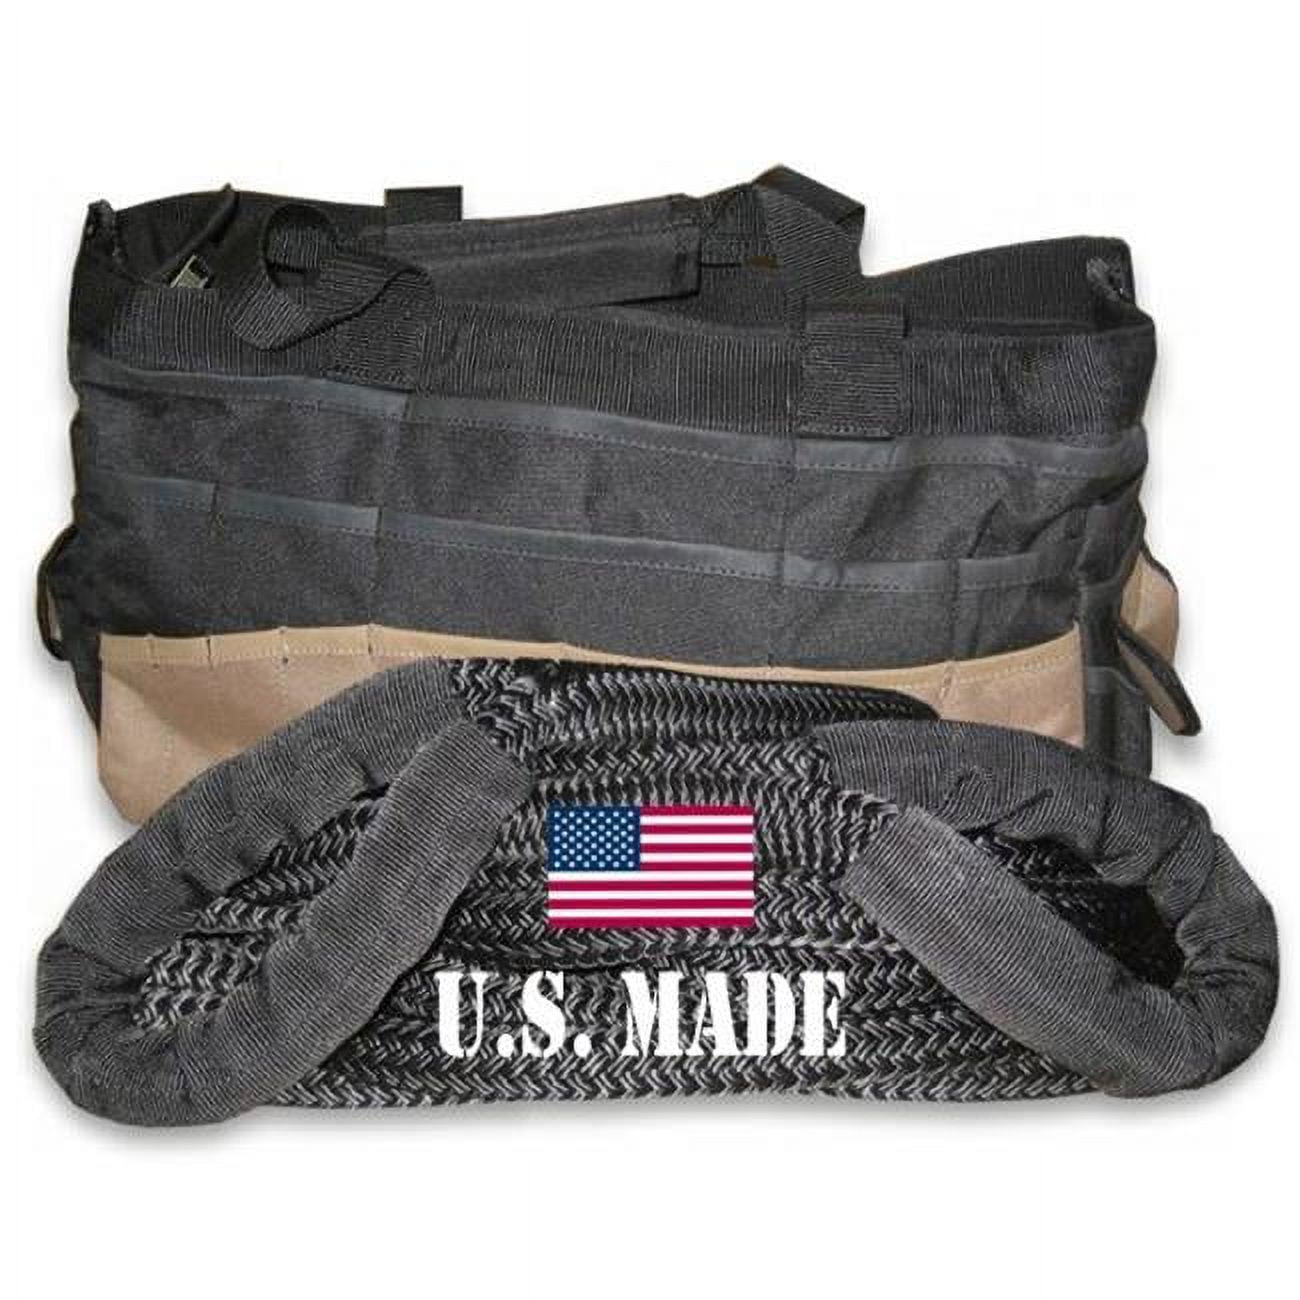 U.s. Made Kinetic Recovery Rope (snatch Rope) Military-grade (black) - 1 Inch X 30 Ft With Heavy-duty Carry Bag (4x4 Vehicle Recovery)